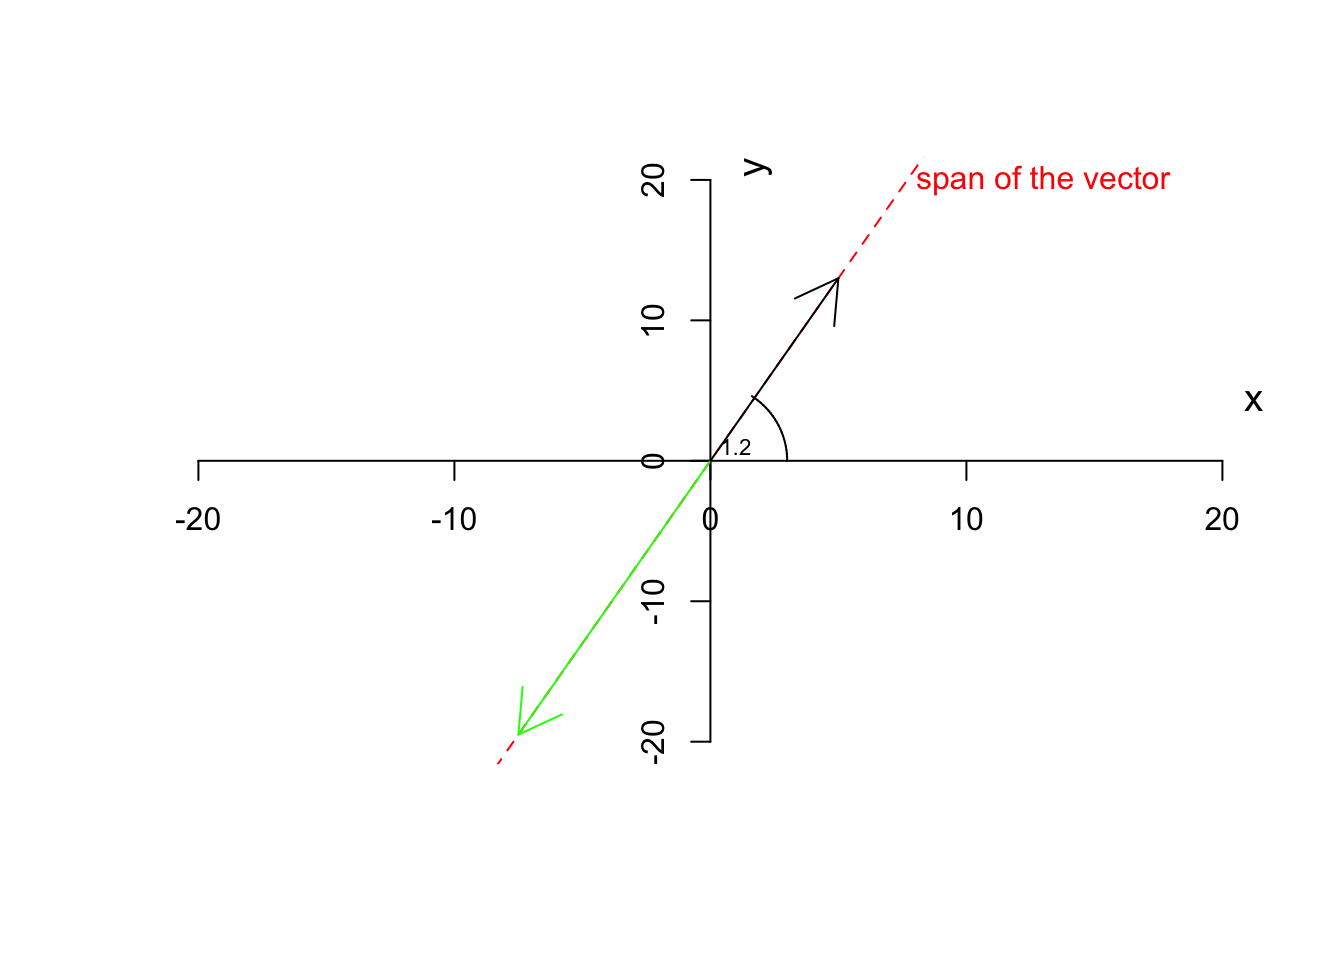 Multiplying a vector by a negative scalar